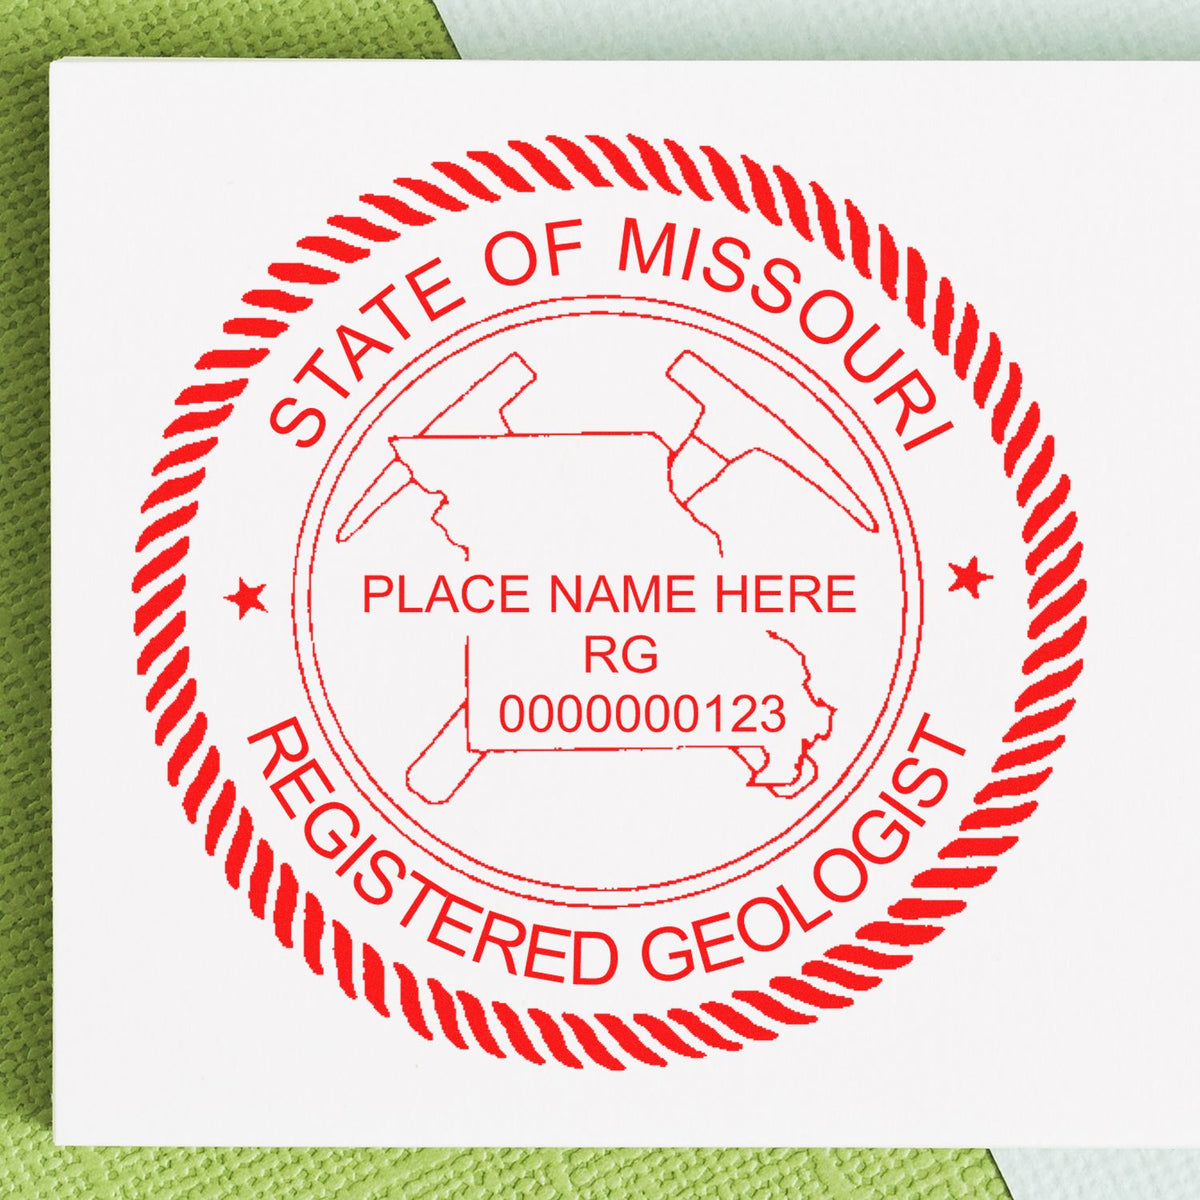 An in use photo of the Slim Pre-Inked Missouri Professional Geologist Seal Stamp showing a sample imprint on a cardstock